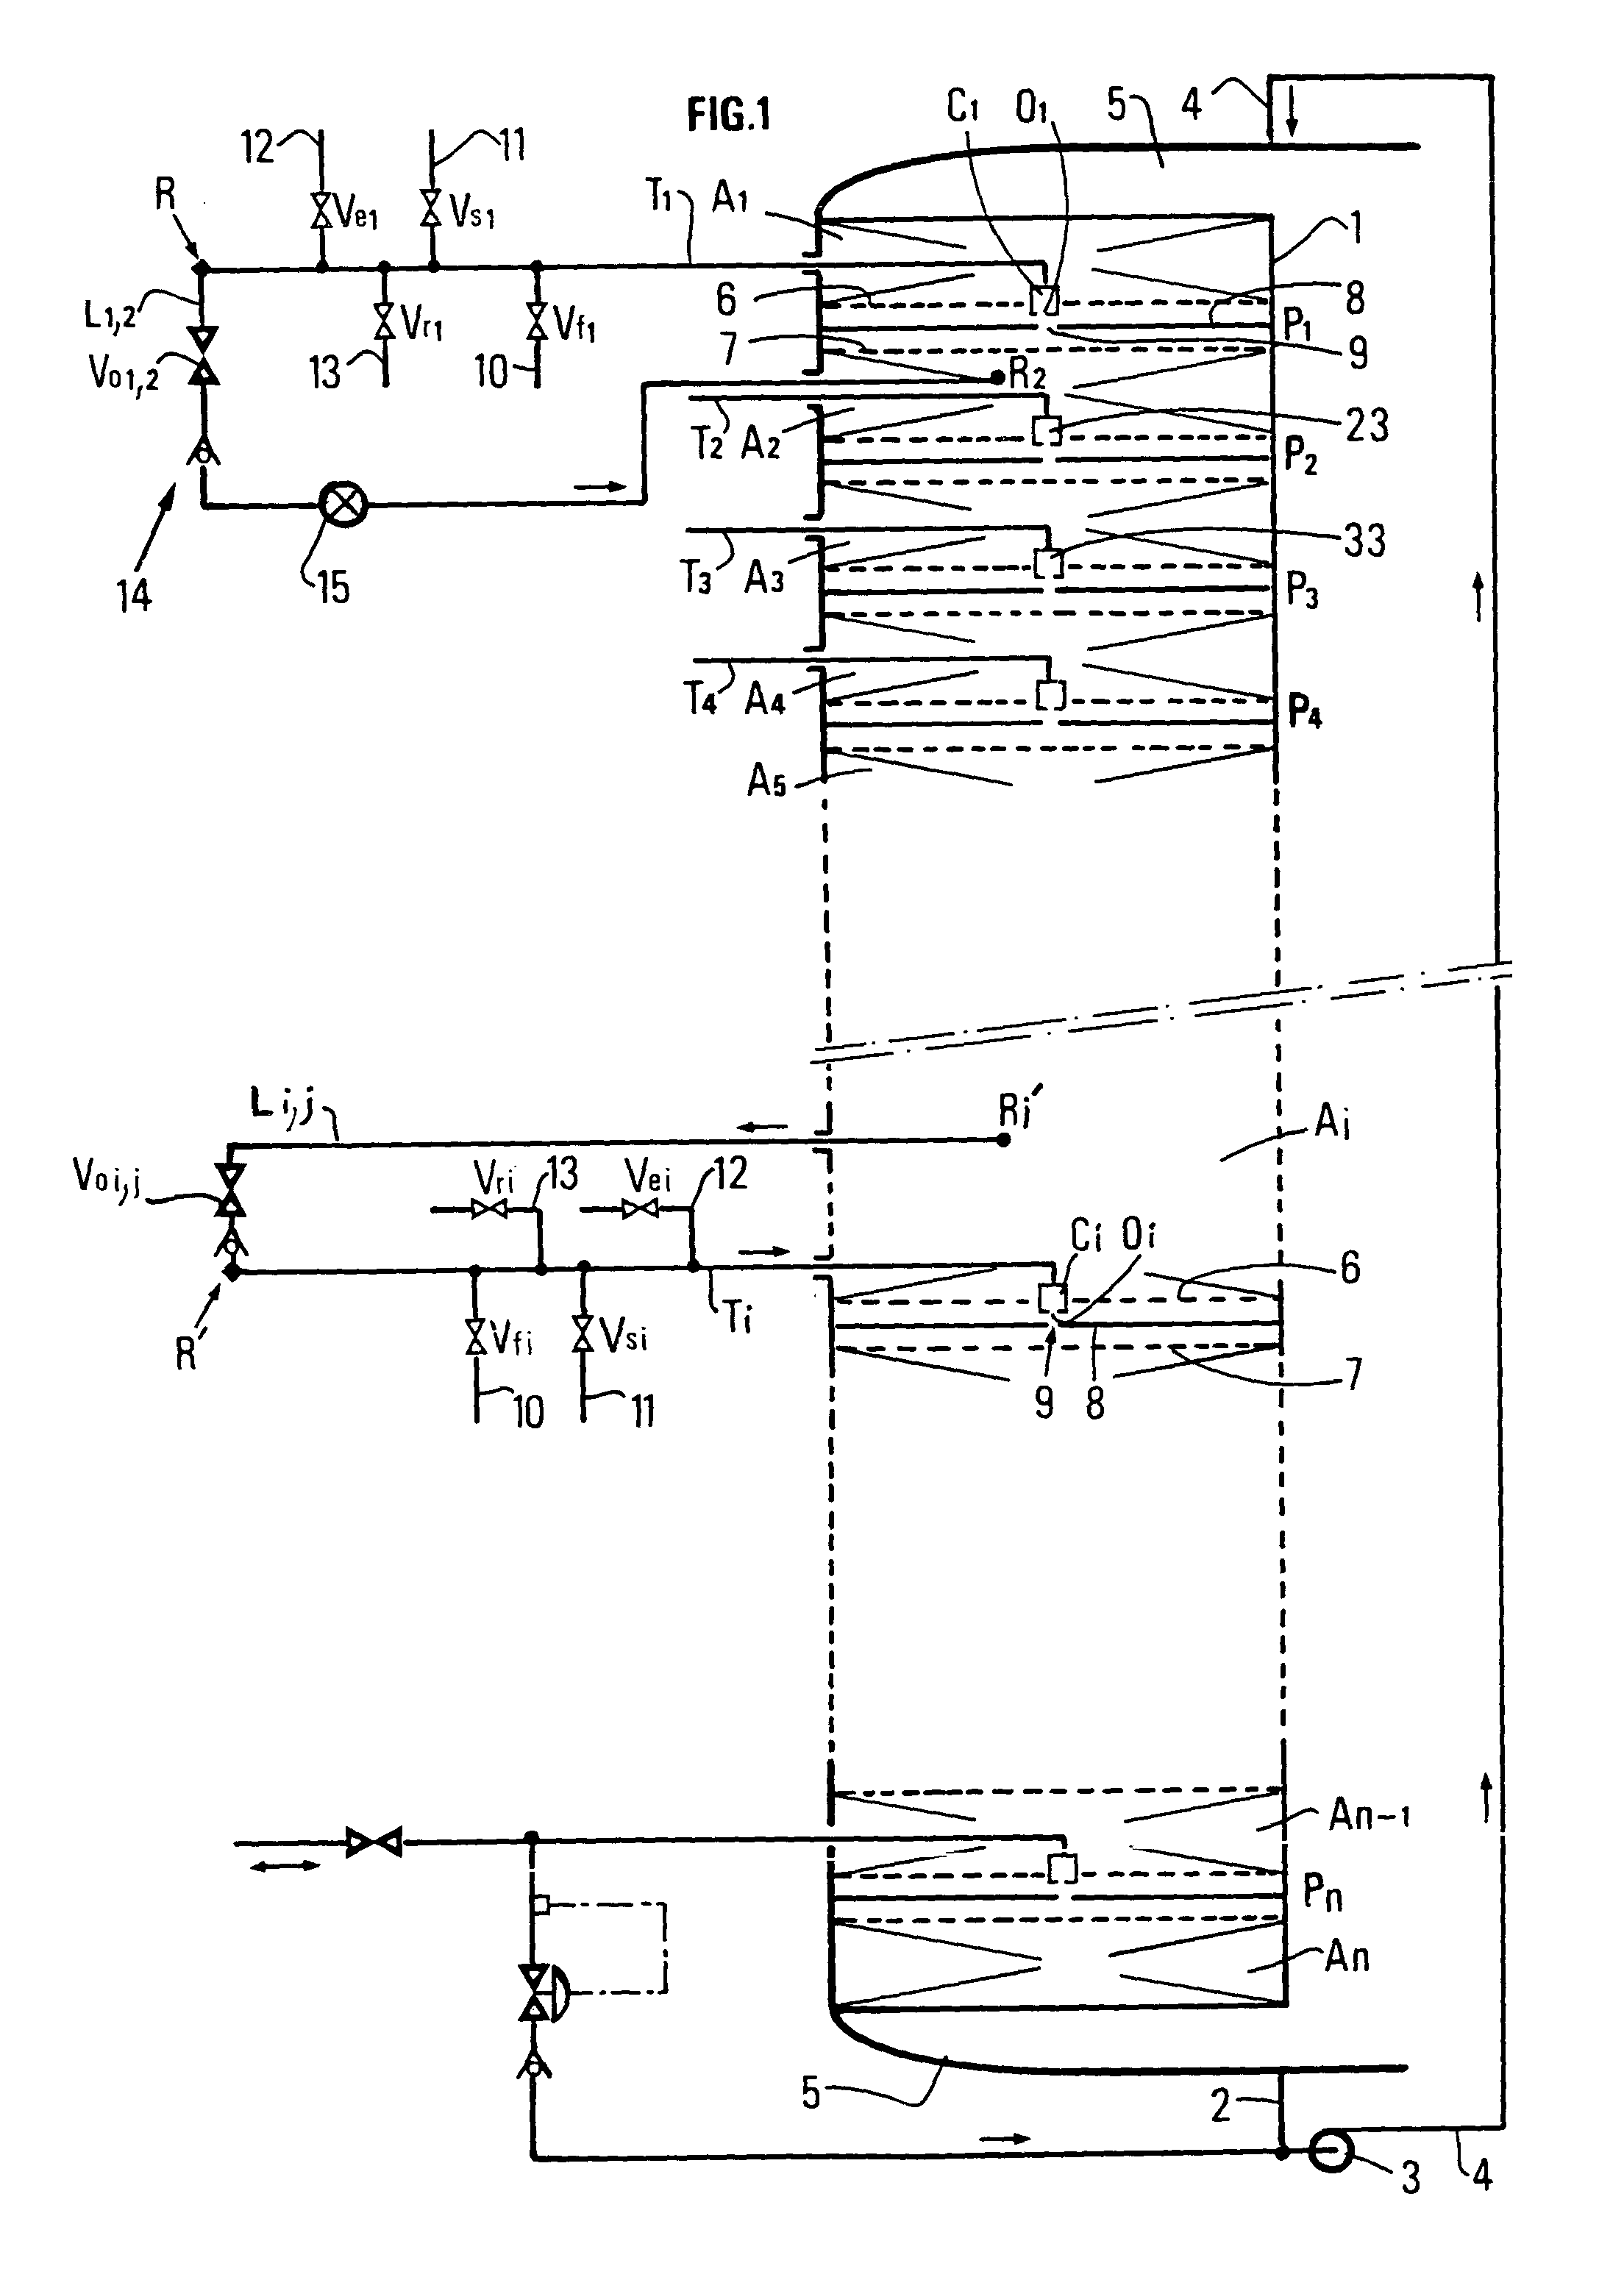 System for injecting a by-pass fluid in a separation method in a simulated moving bed